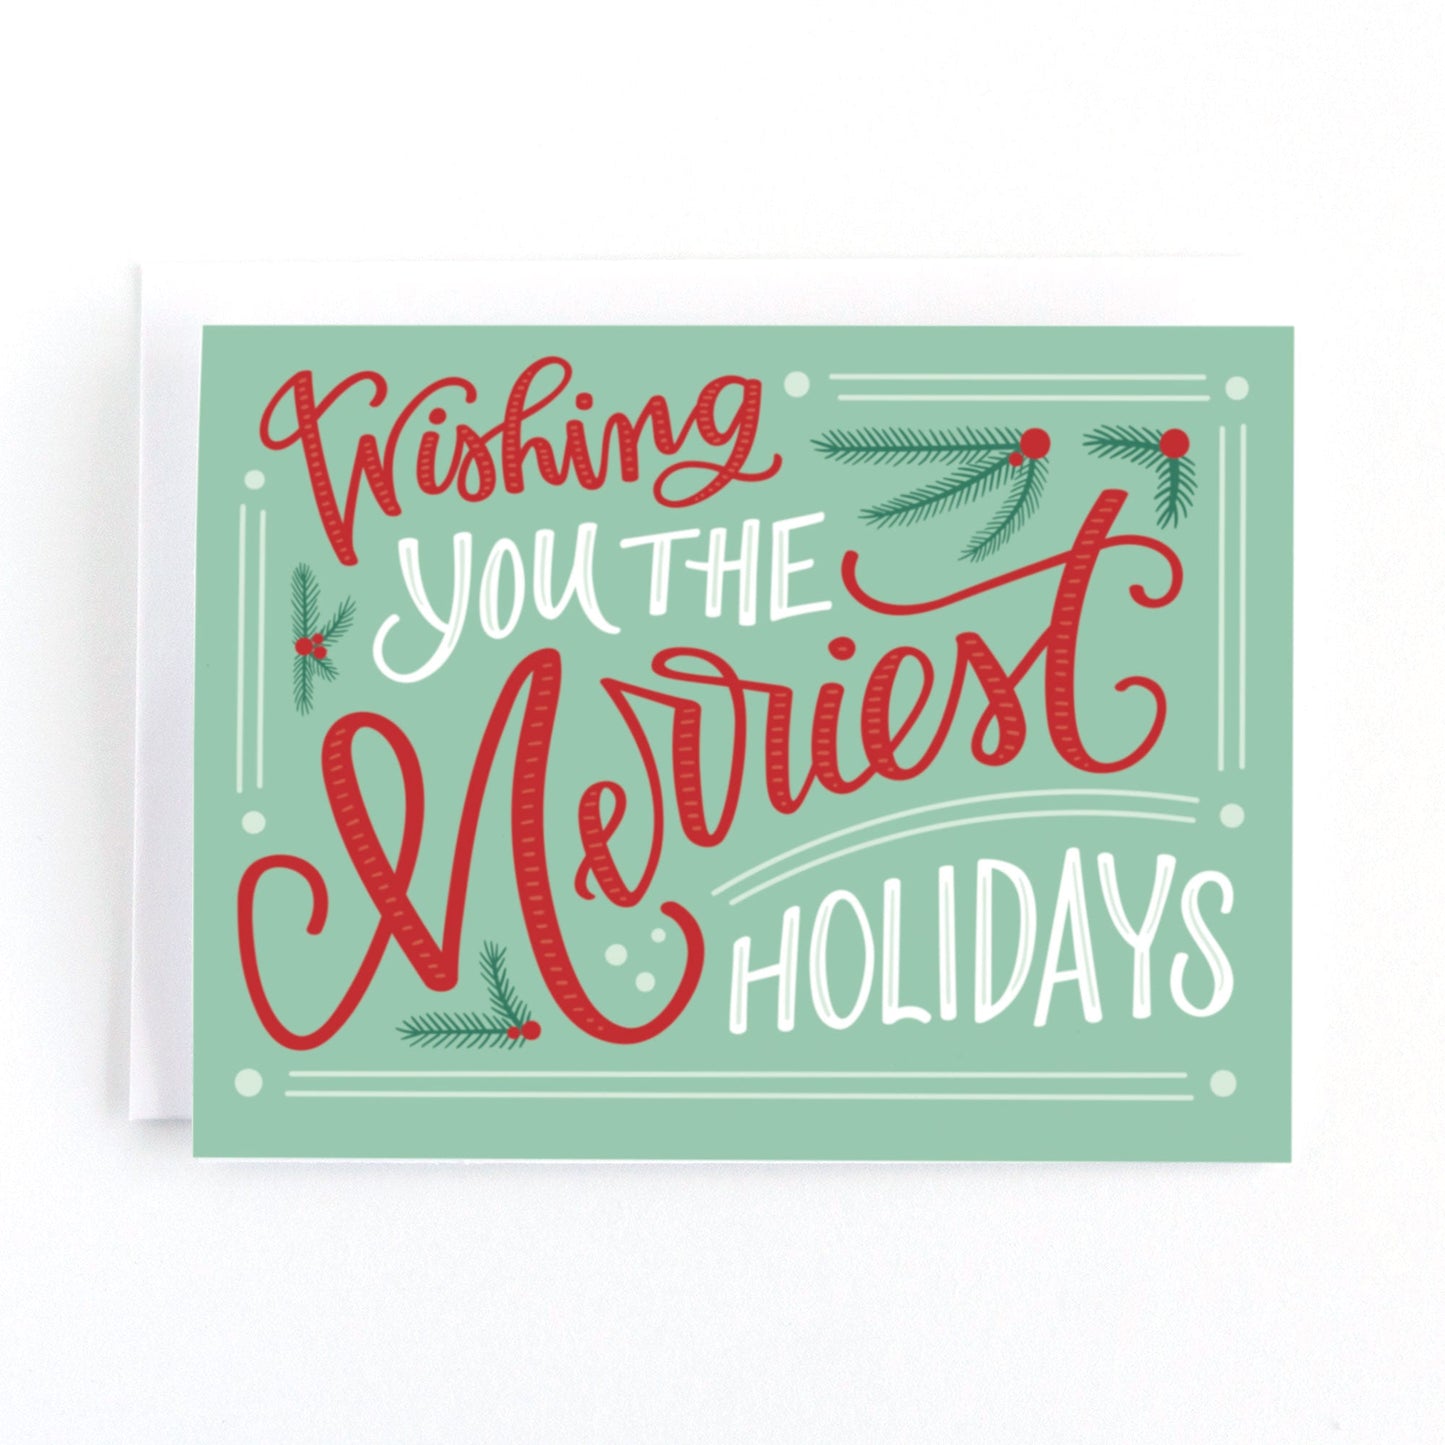 Christmas card with a mint and red colour palette and vintage inspired lettering saying, wishing you the merriest holidays